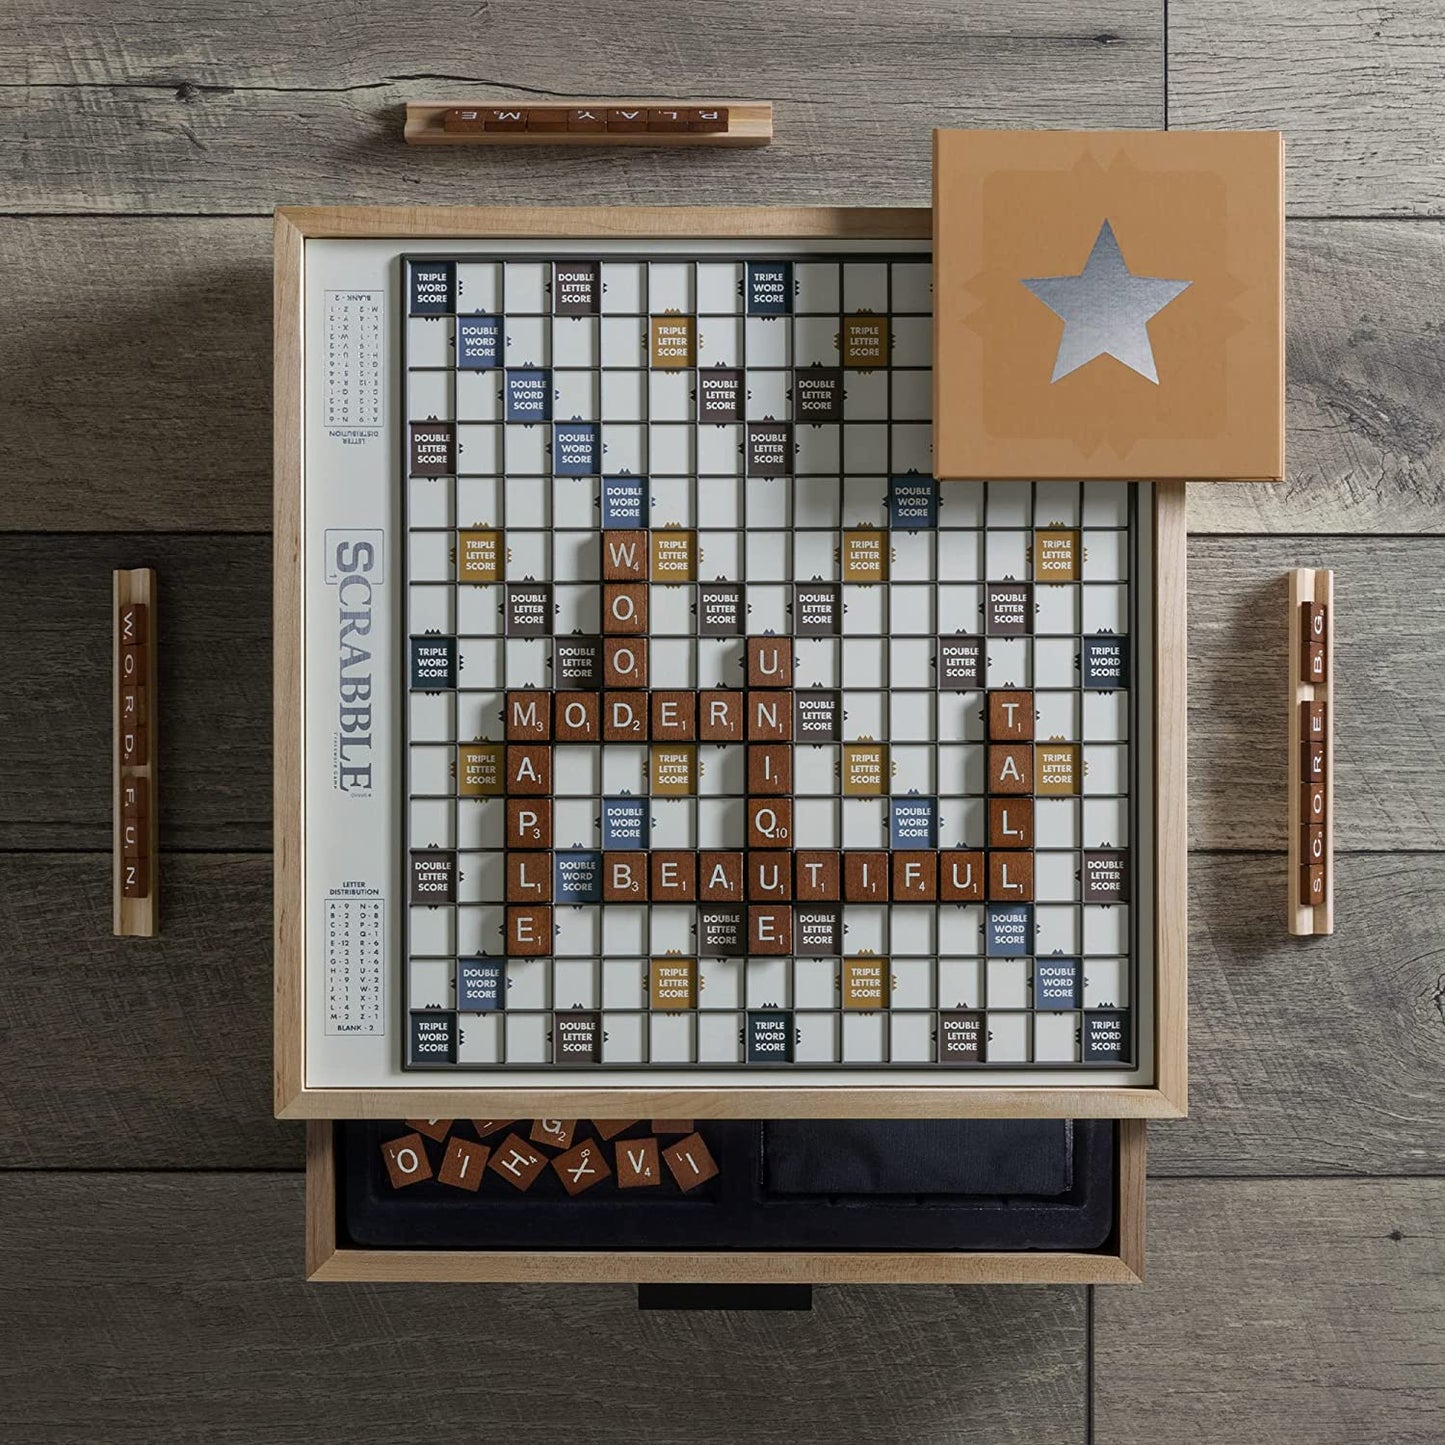 A maple wood luxury edition of Scrabble with game letter tiles on the board and in the drawers.